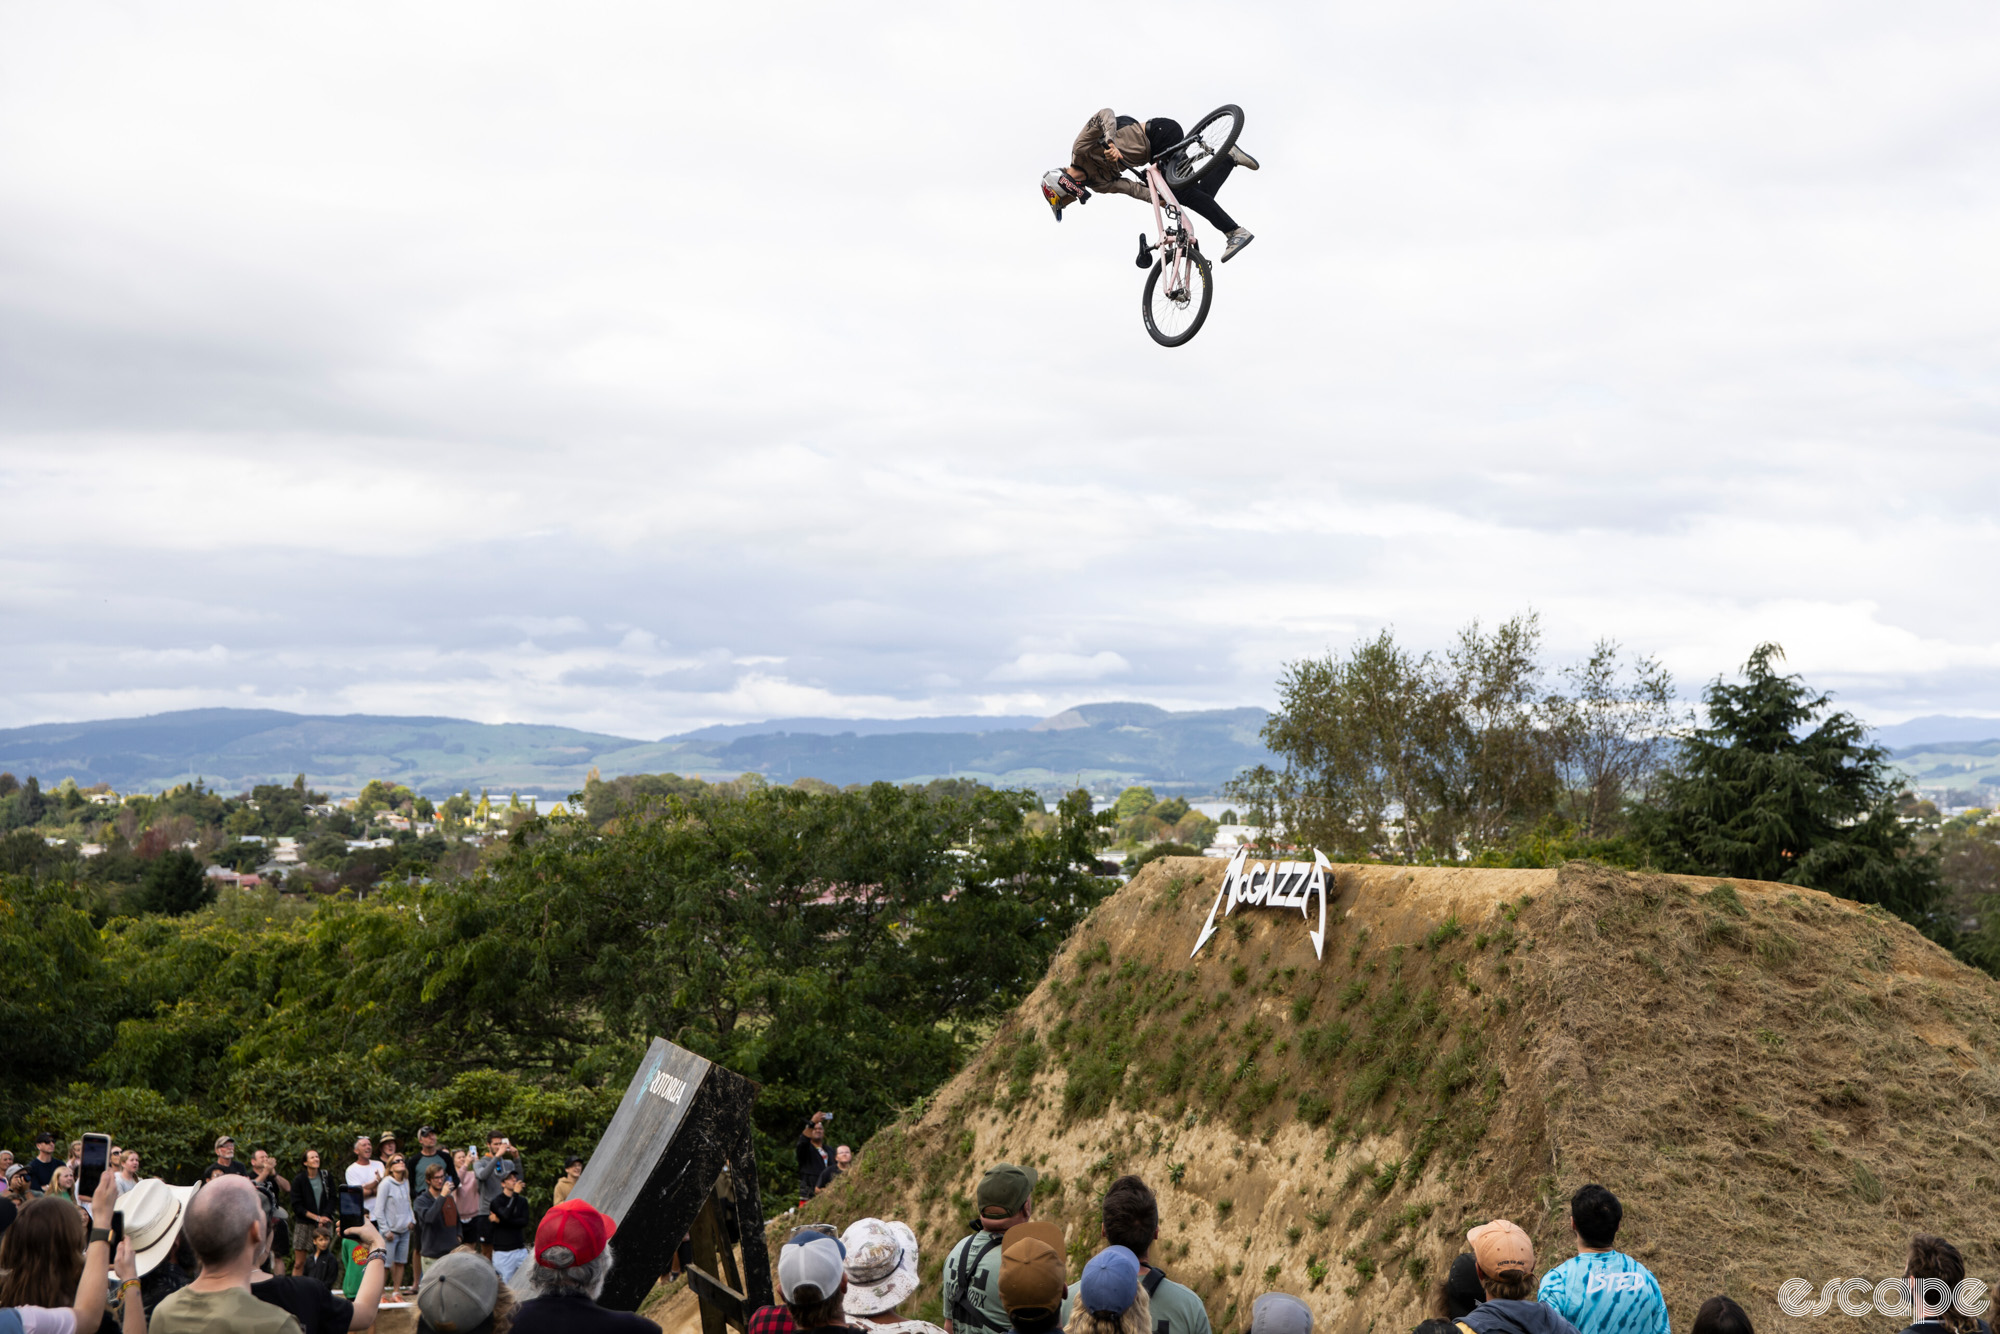 Emil Johannson launches a trick off a ramp at Crankworx Rotorua. He's about 20 feet in the air, and has whipped the bike through at least a 360-degree spin and is looking down as he prepares to catch the pedals again before landing.